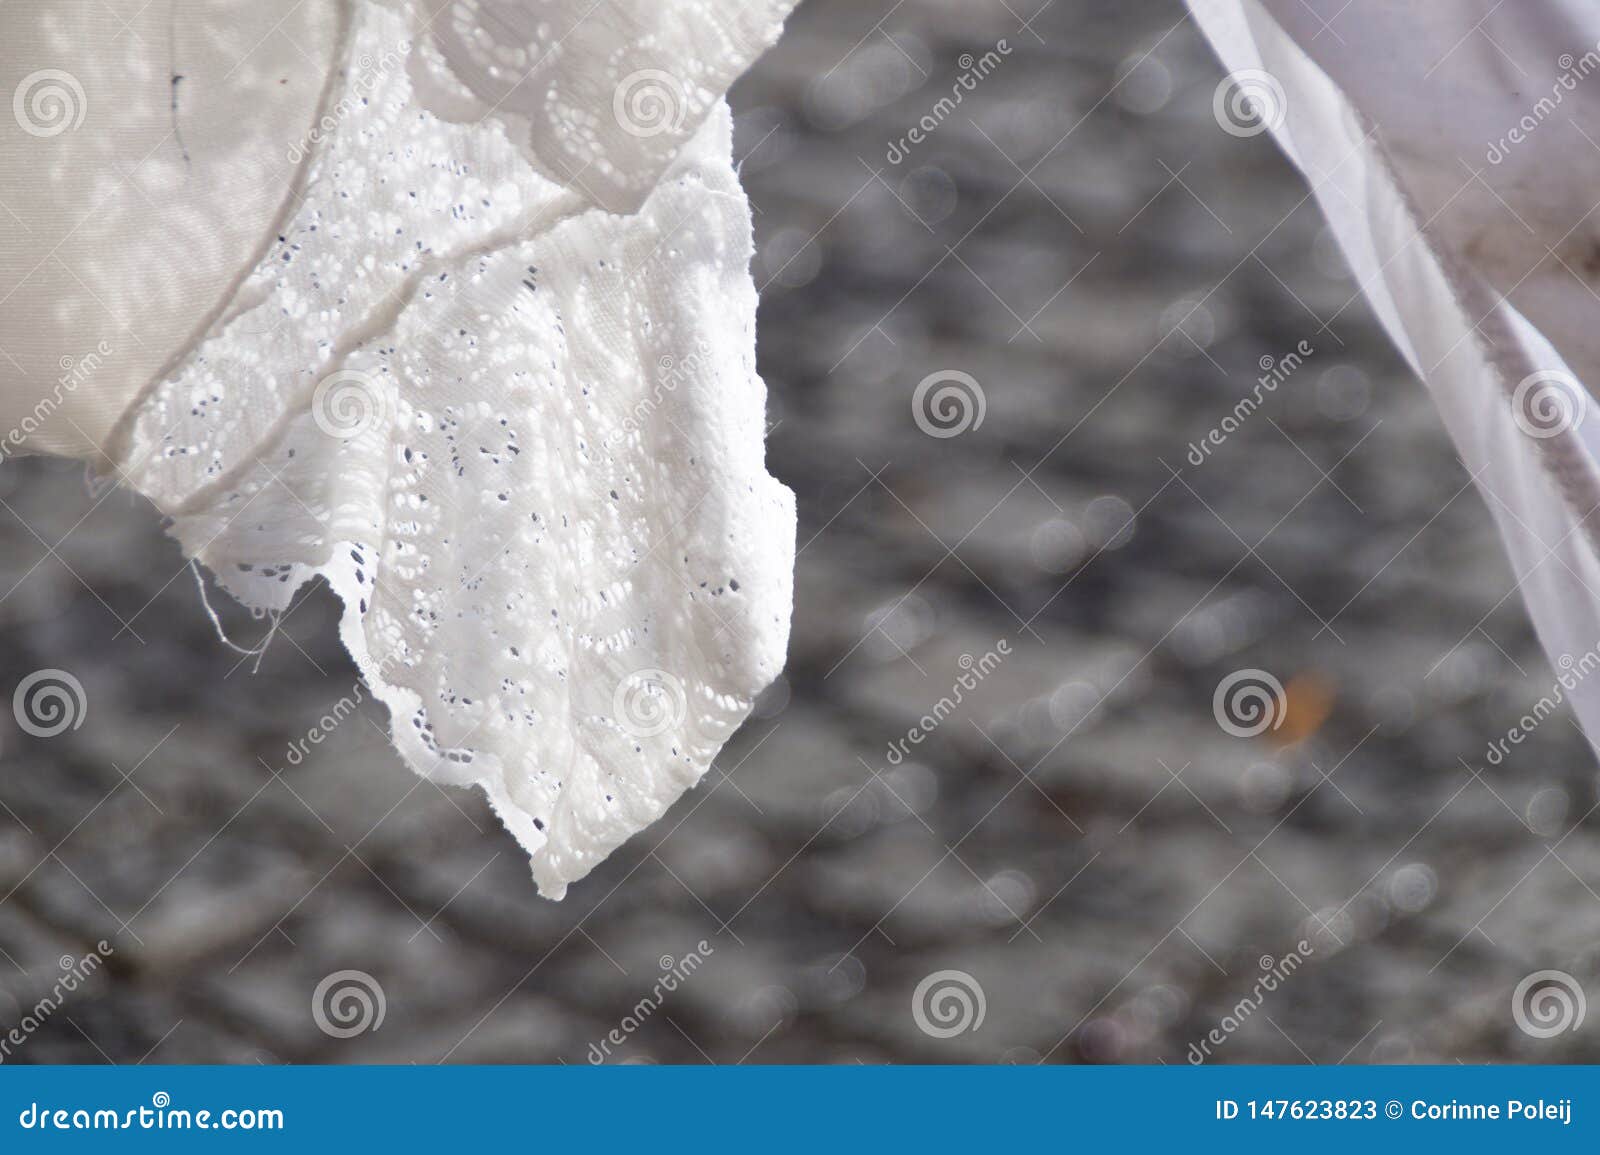 Bed Dirty Underwear Stock Photos - Free & Royalty-Free Stock Photos from  Dreamstime